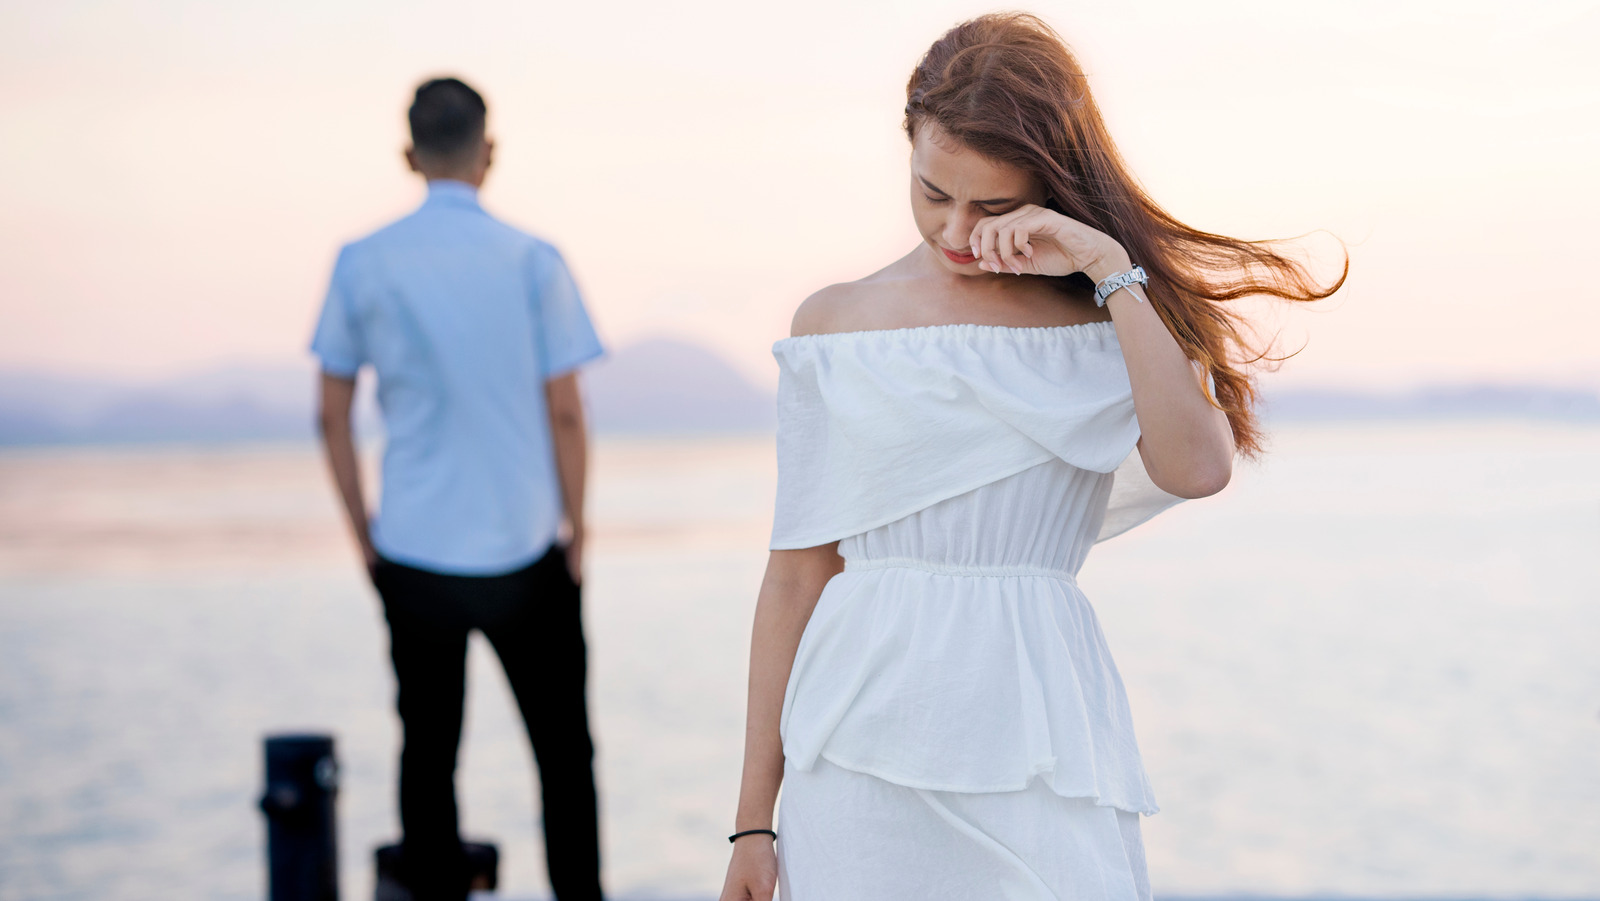 What You Should Do If Your Partner Breaks Up With You For Being Broke 4848